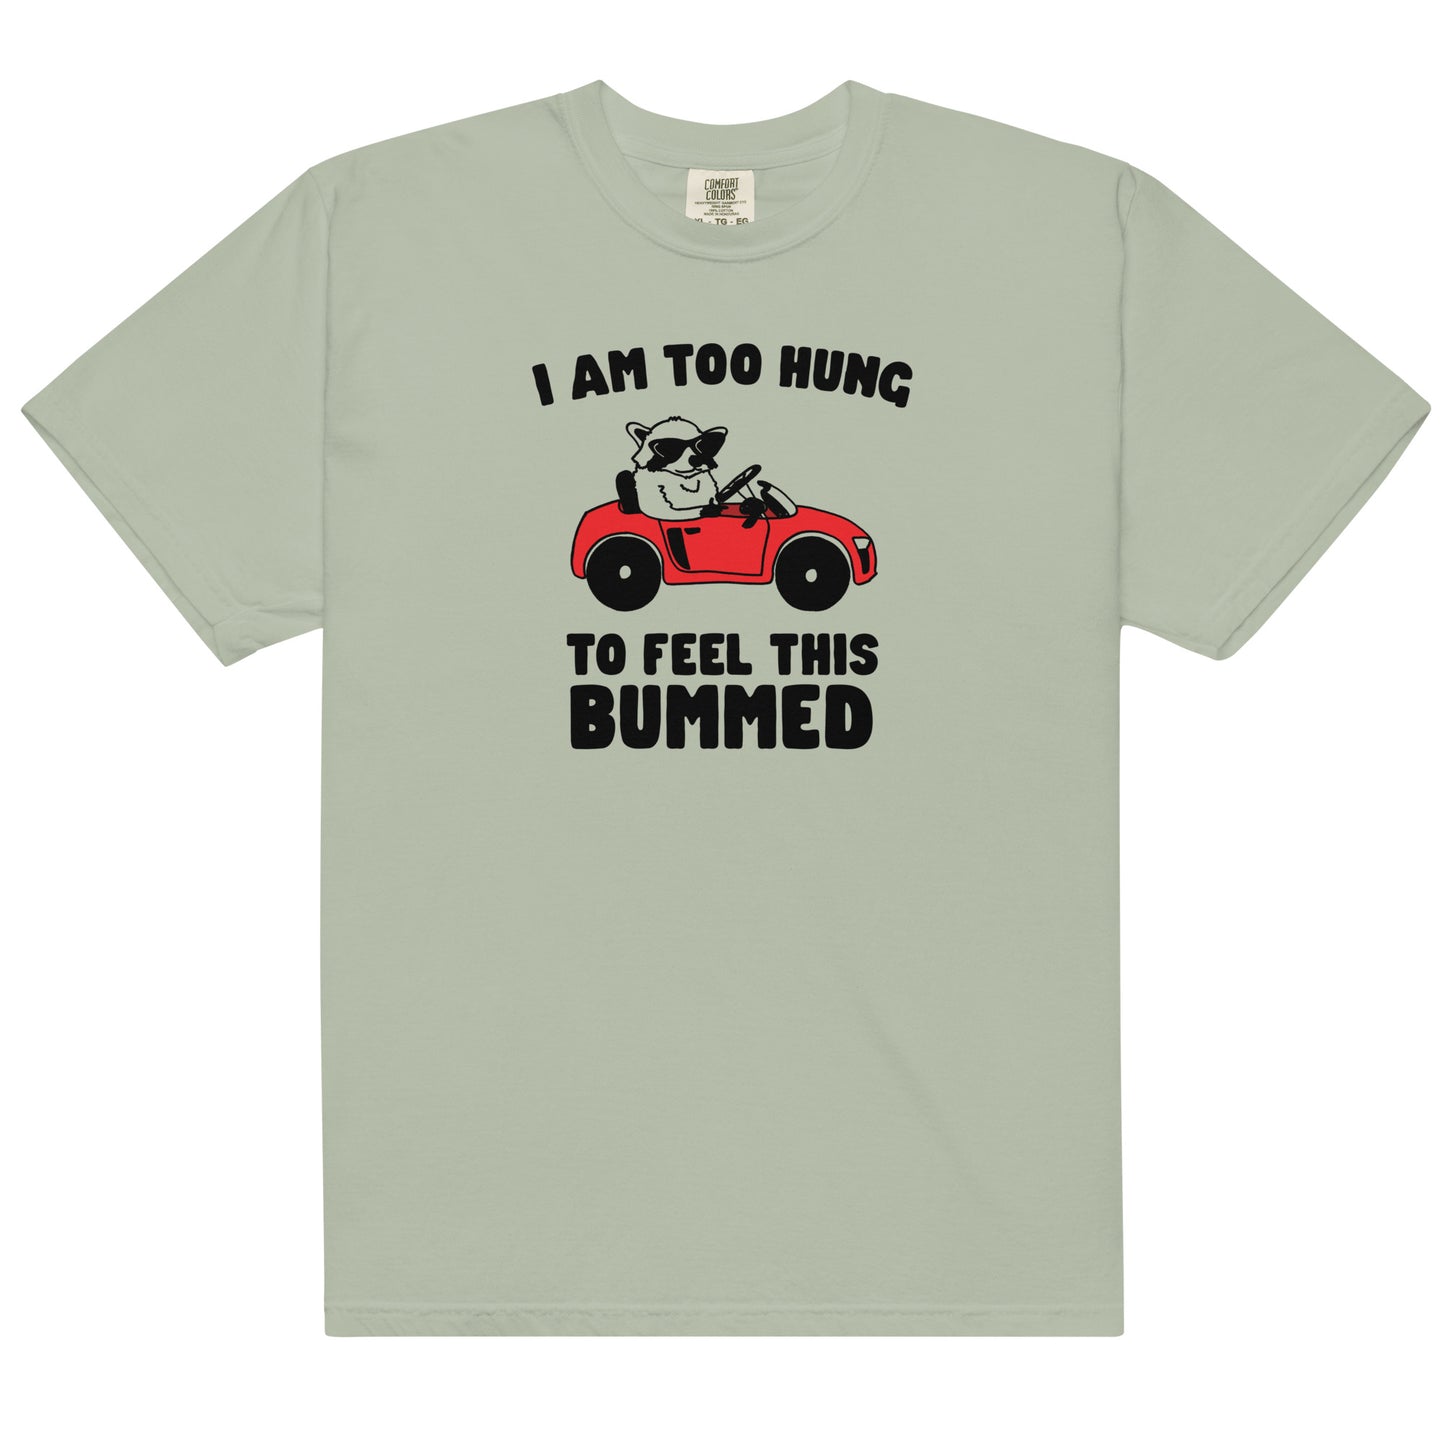 I Am Too Hung to Feel This Bummed Unisex t-shirt